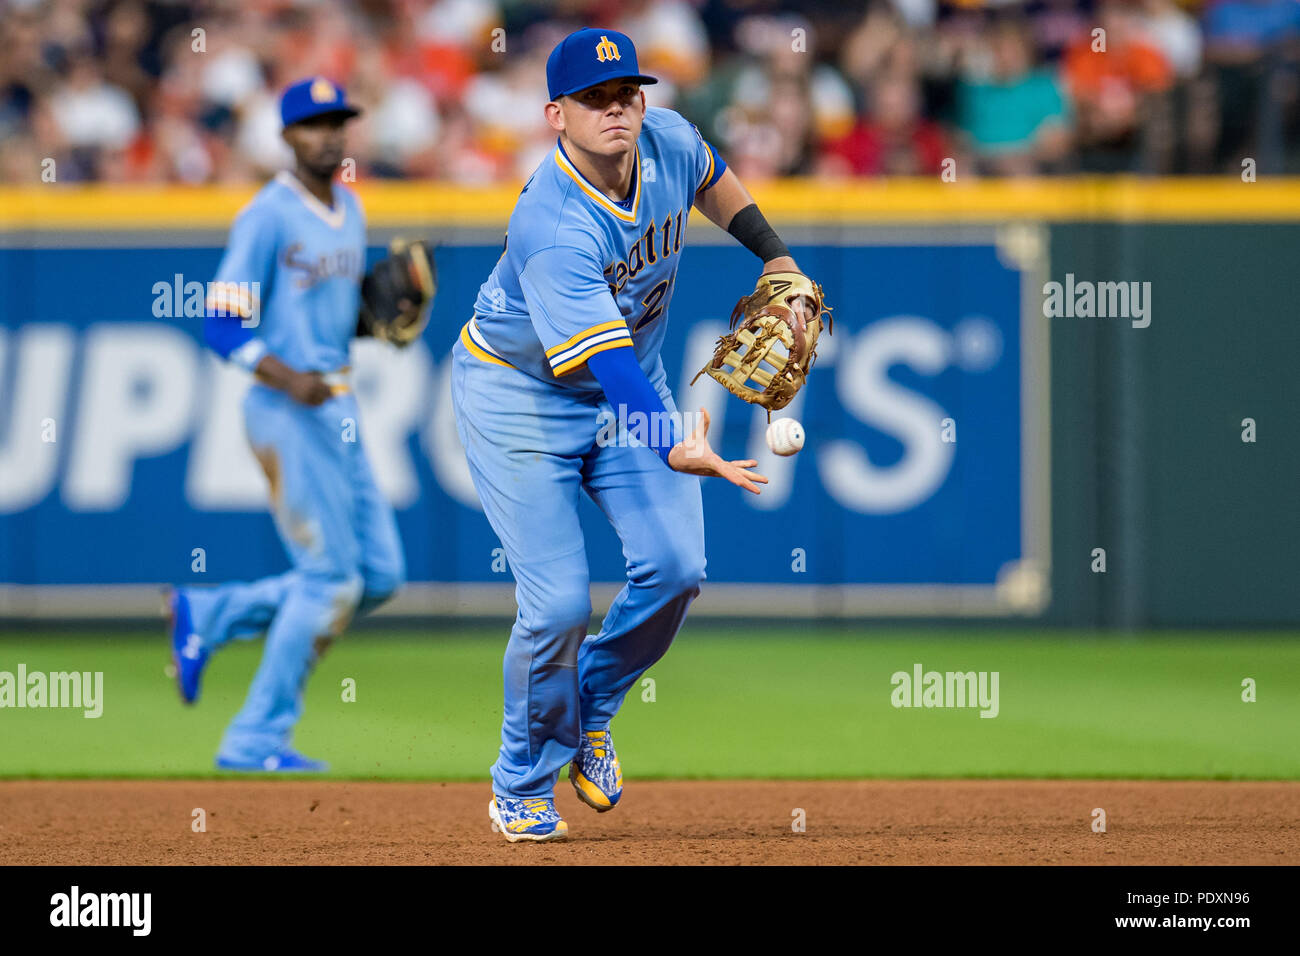 August 10, 2018: Seattle Mariners first baseman Ryon Healy (27) tosses the ball toward first to record an during a Major Baseball game between Houston Astros and the Seattle